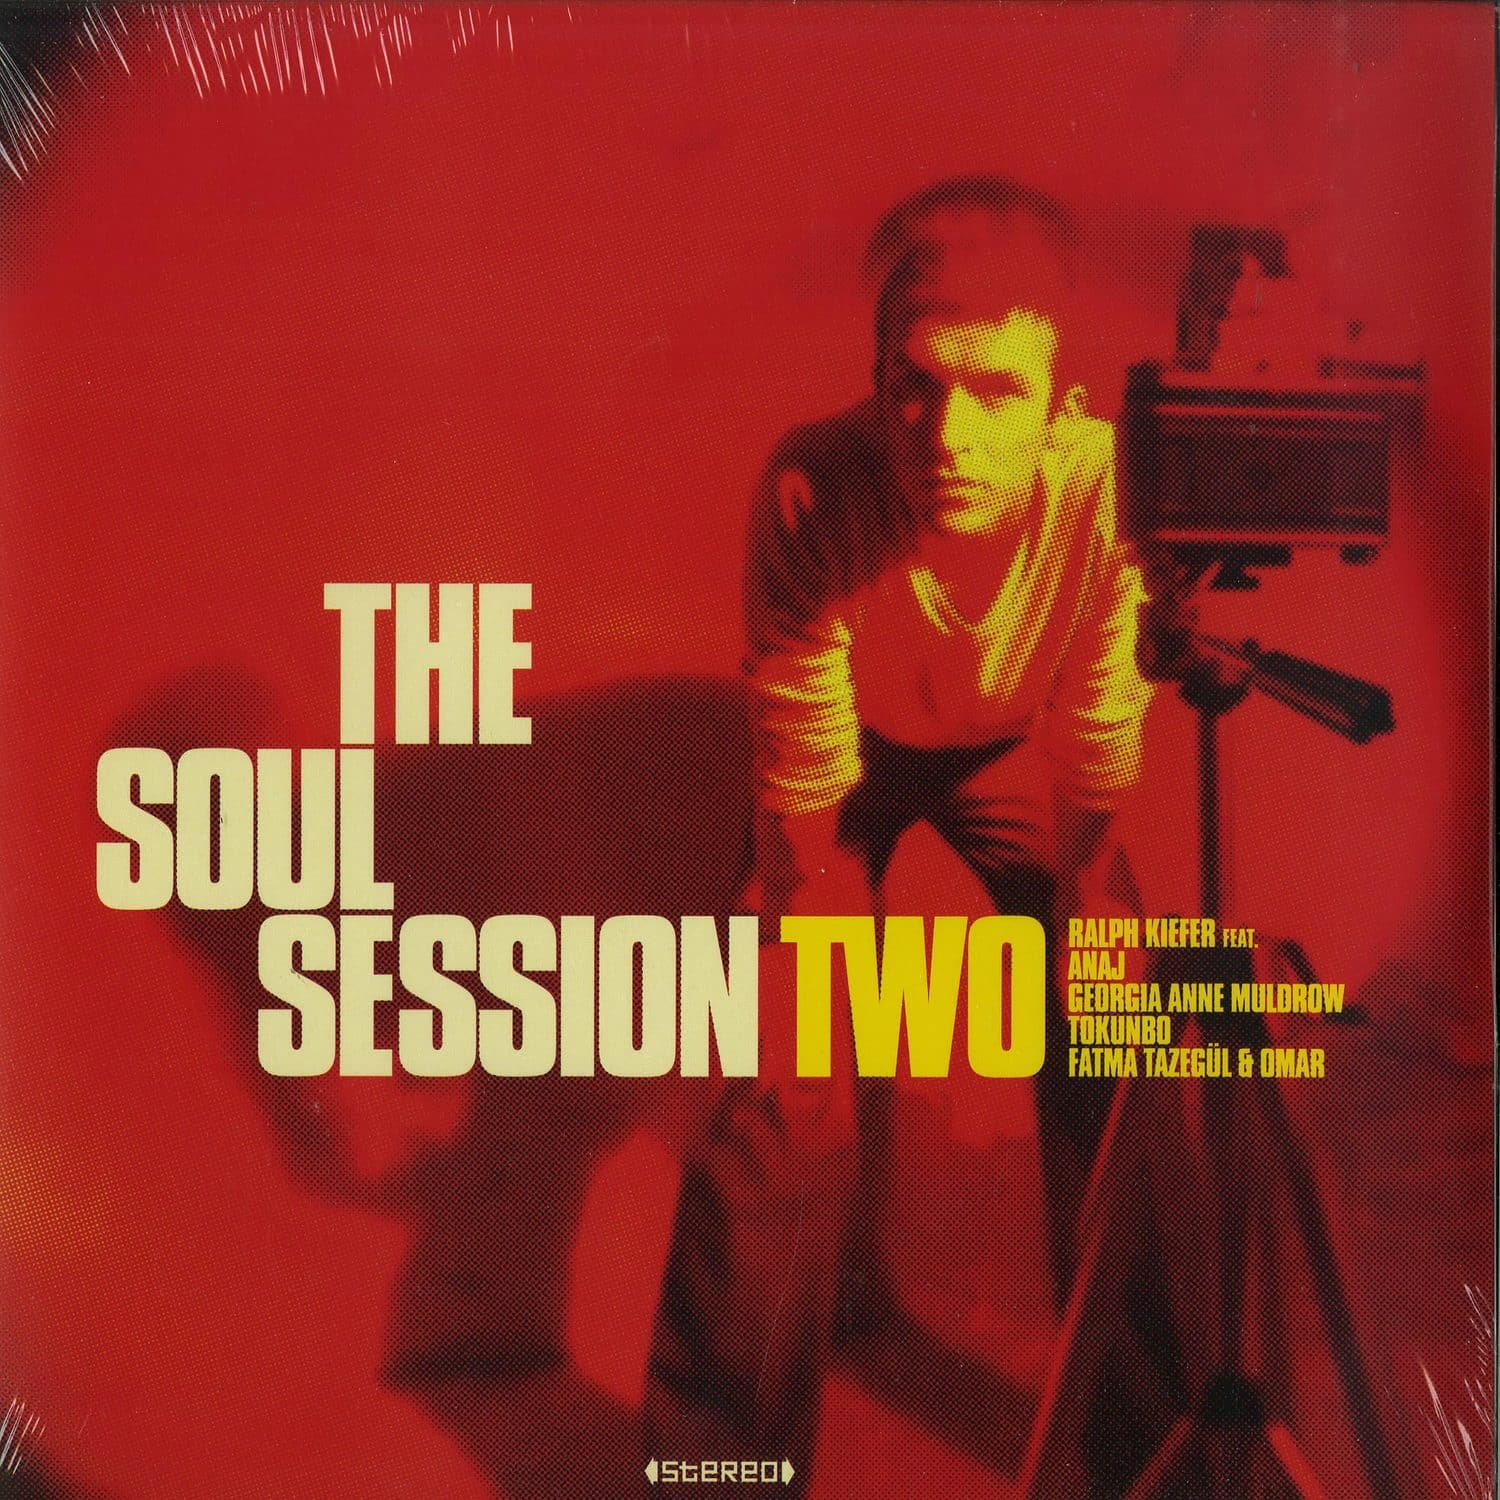 The Soul Session - TWO 